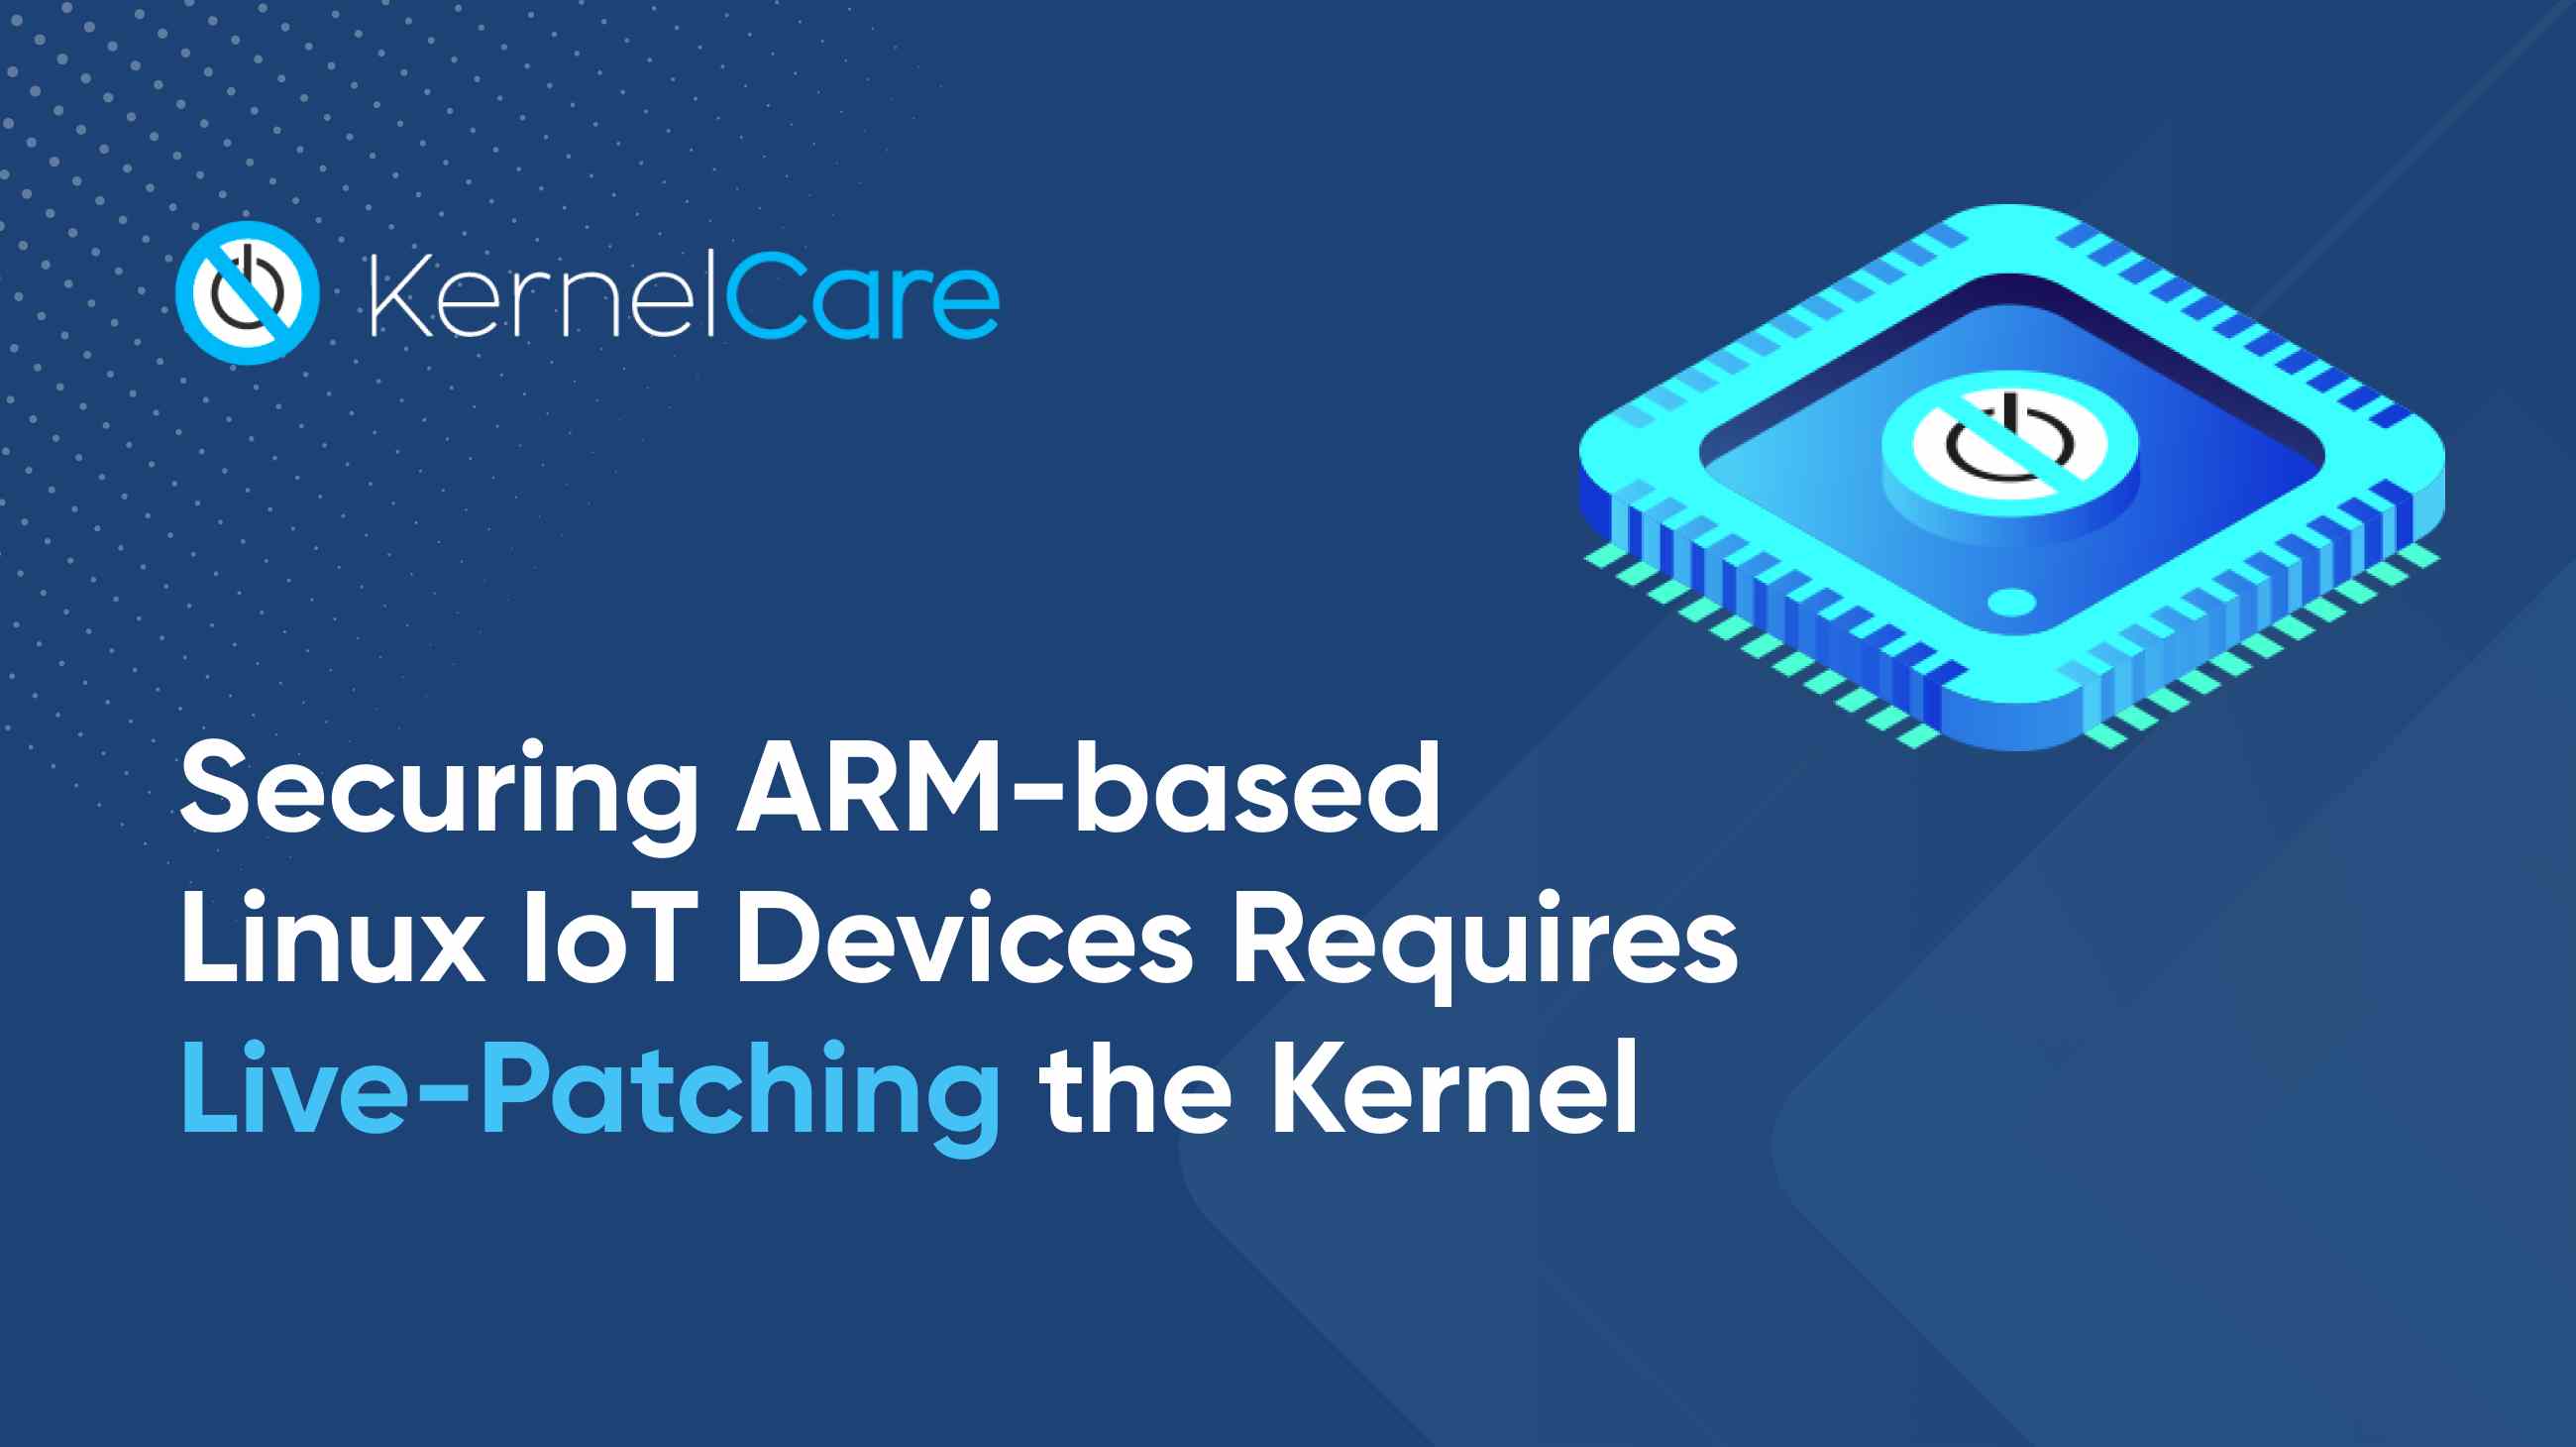 ARM-based Linux IoT Devices Requires Live-Patching the Kernel